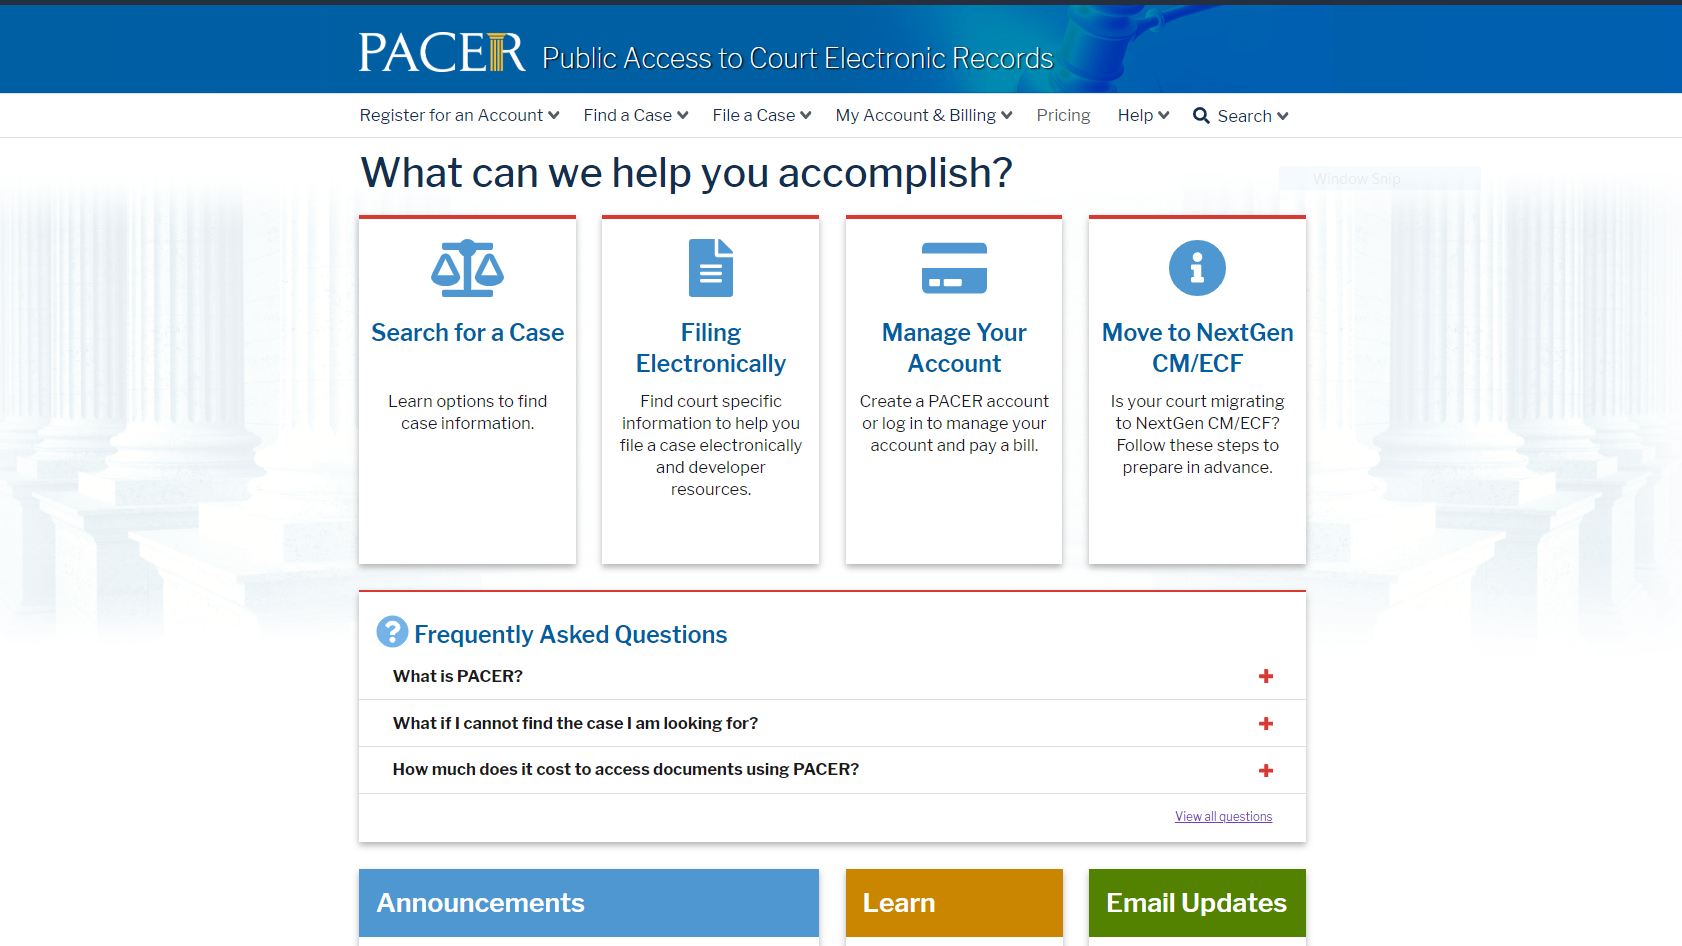 For First Time in Decade, PACER Website Gets Major Update